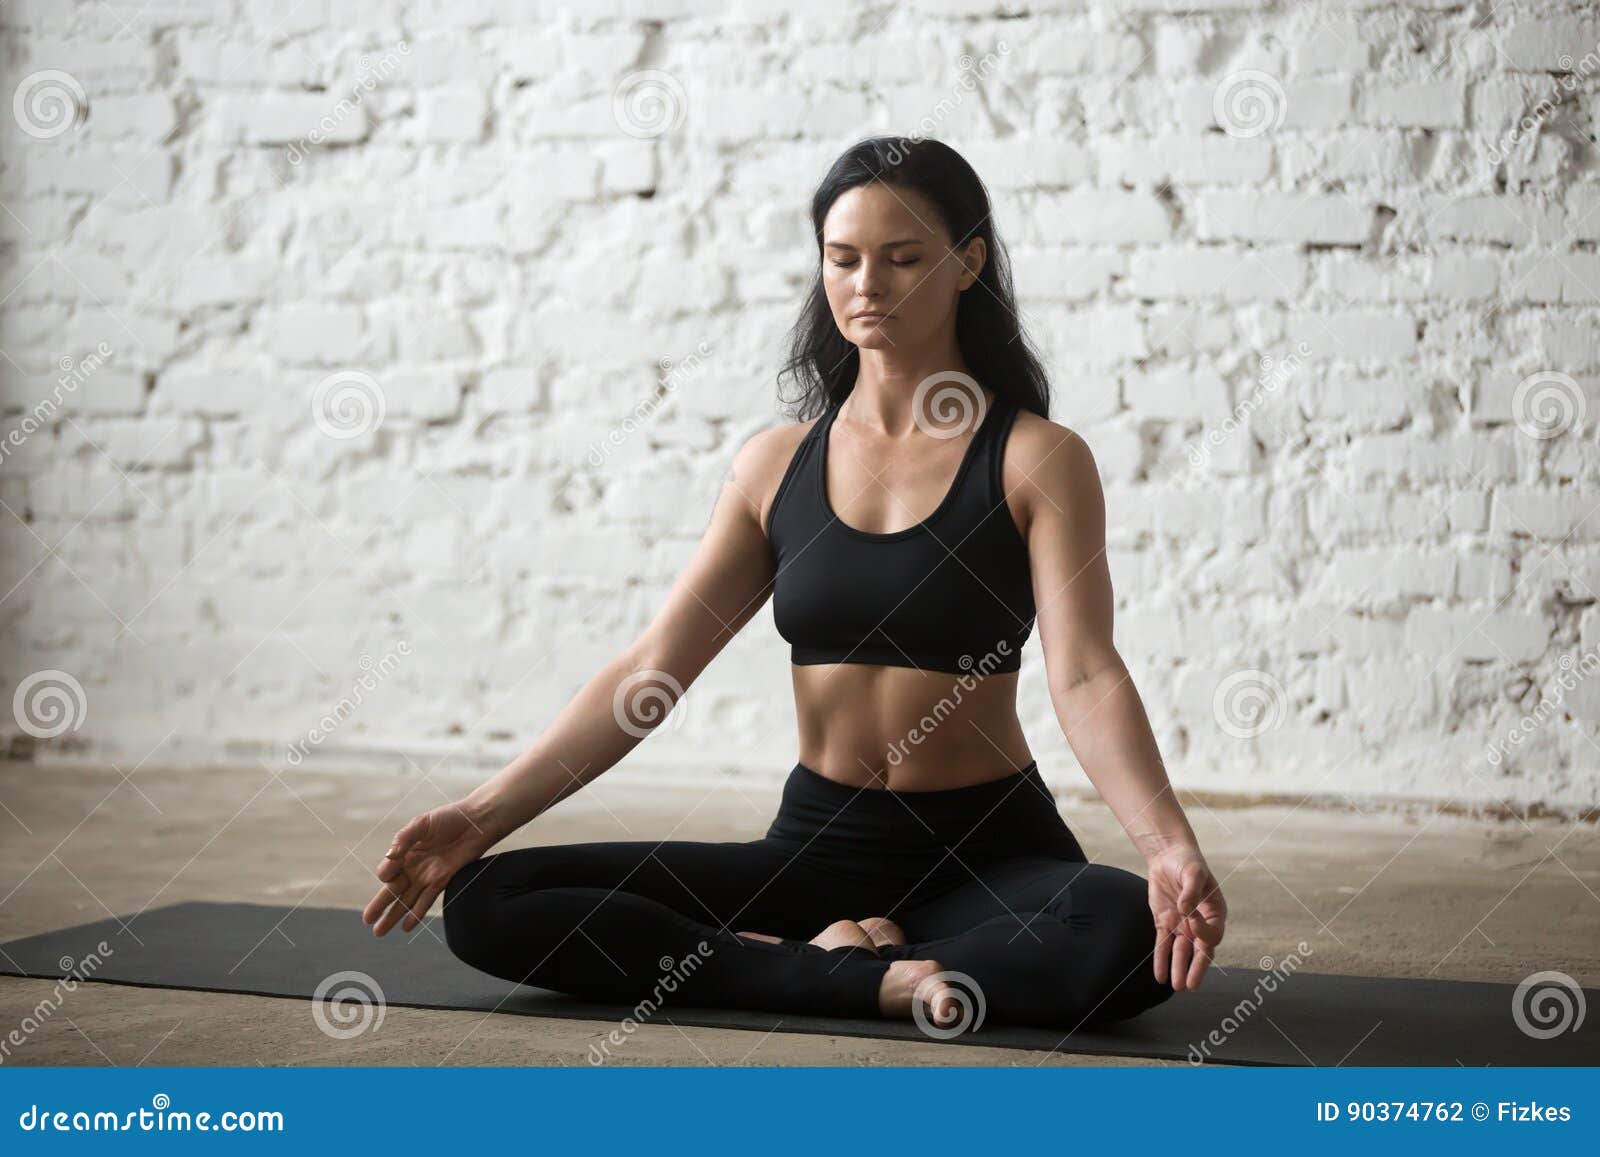 Simple yoga poses for weight loss and muscle gain | HealthShots